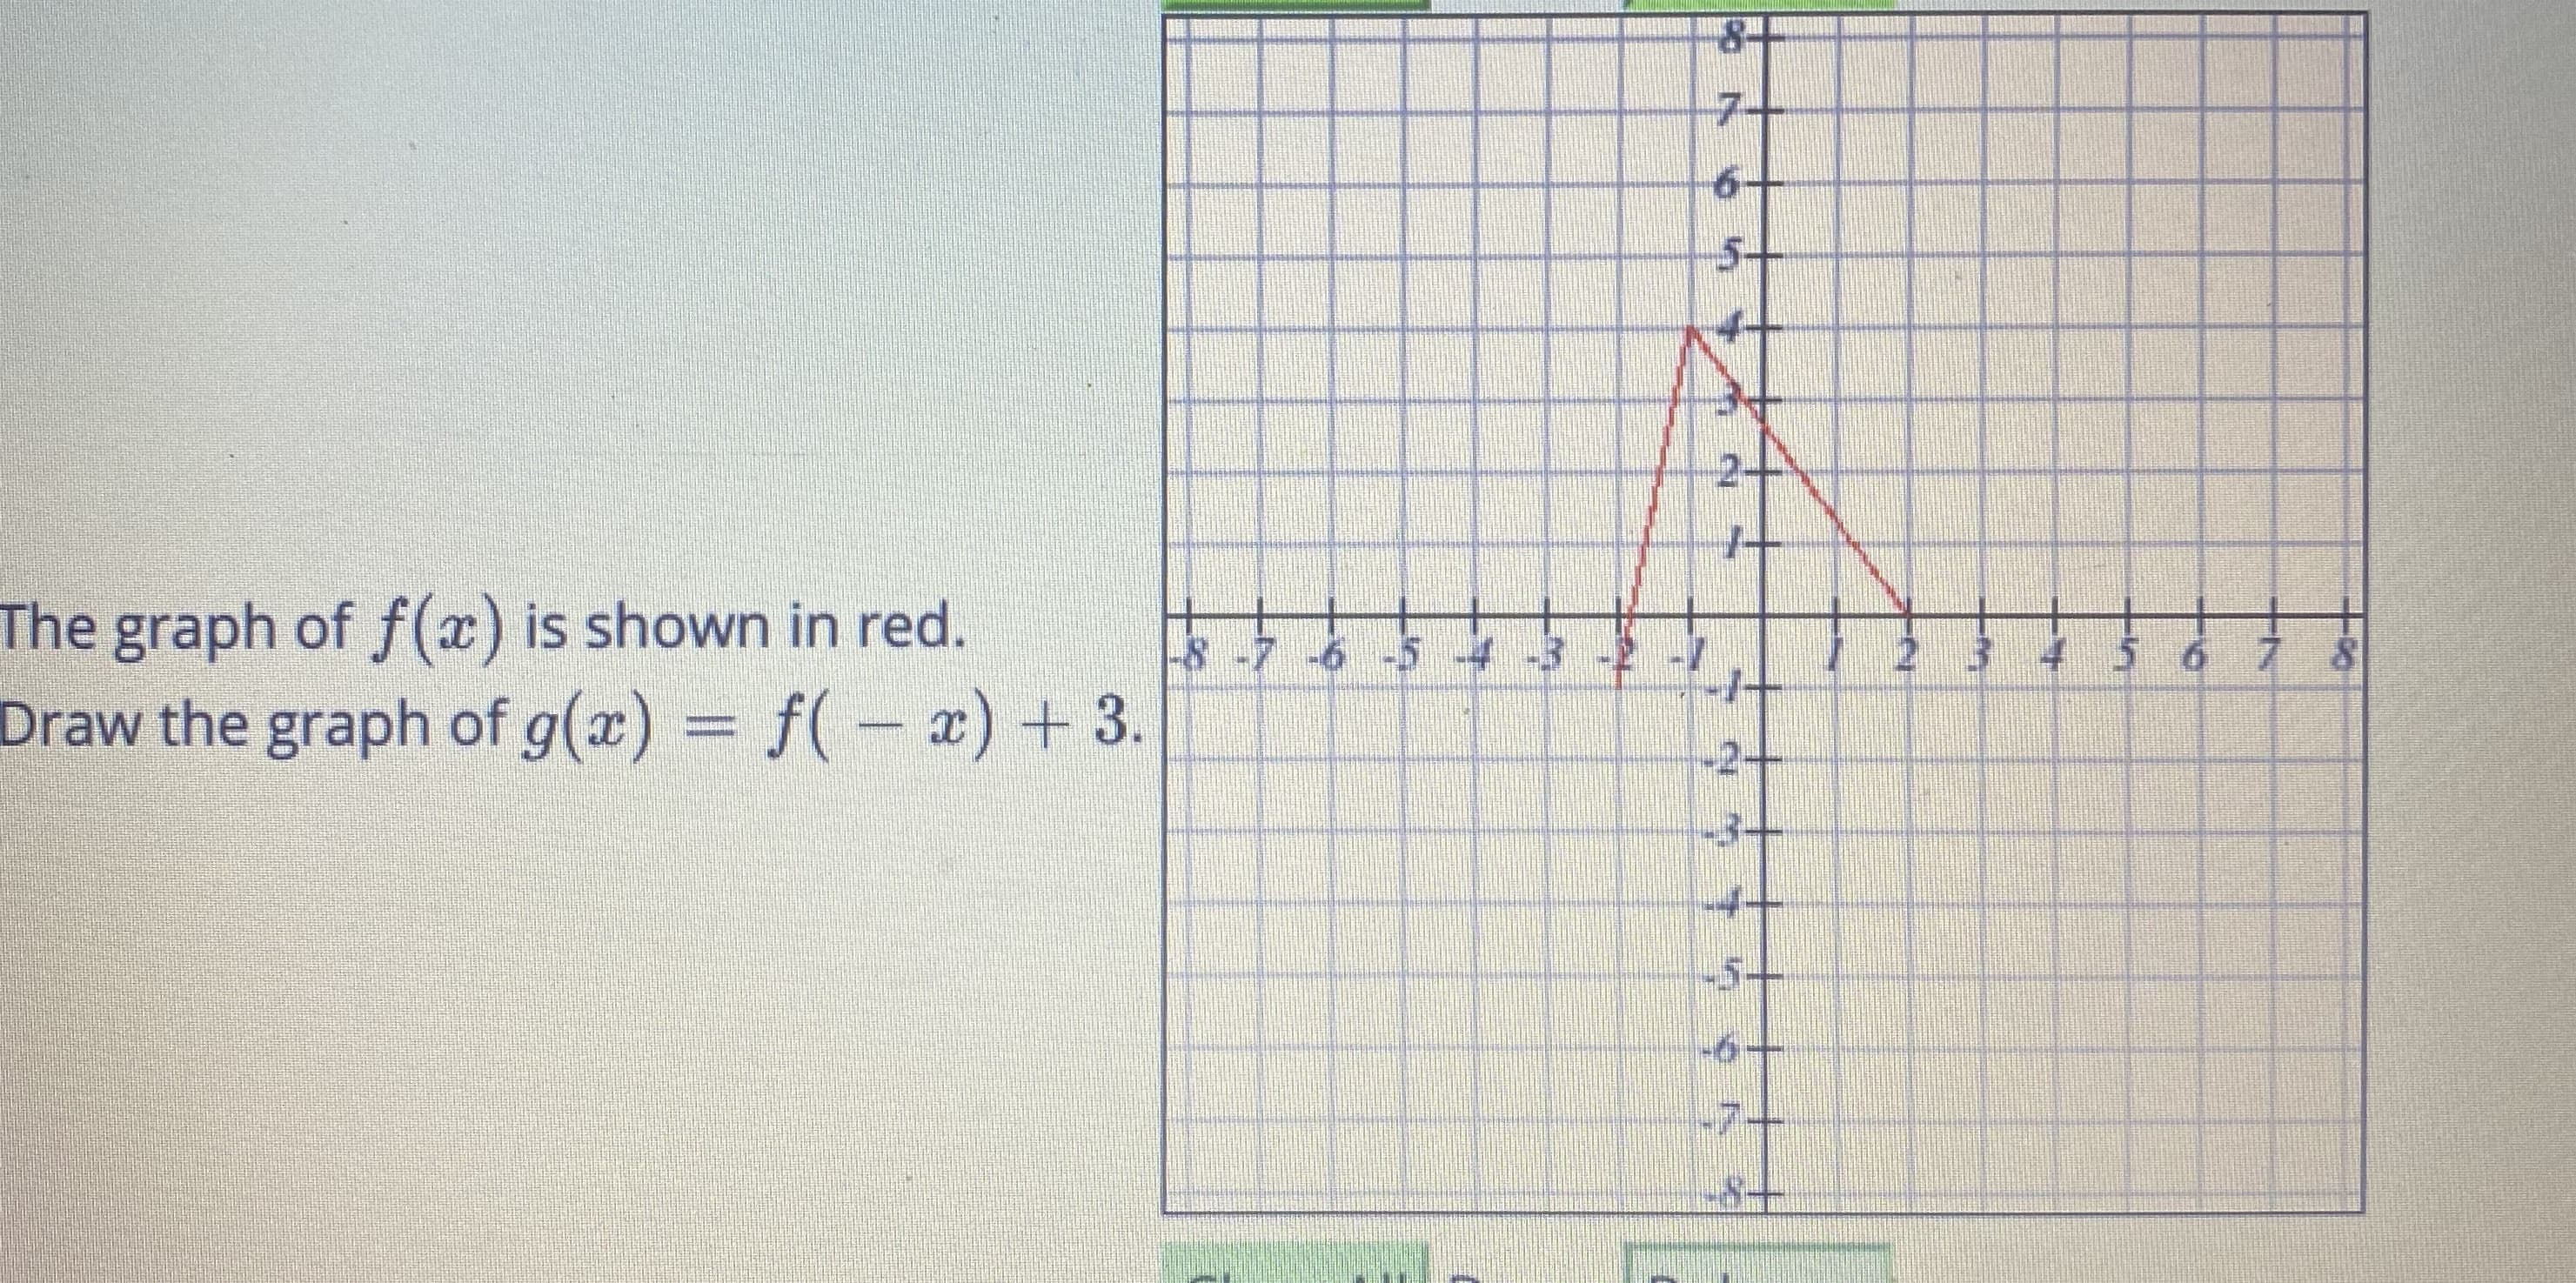 The graph of f(x) is shown in red.
Draw the graph of g(x) = f(-) +3.
s-7 -6 -5
-31,
2 3 4 5 67 8
2-
-3+
5.
